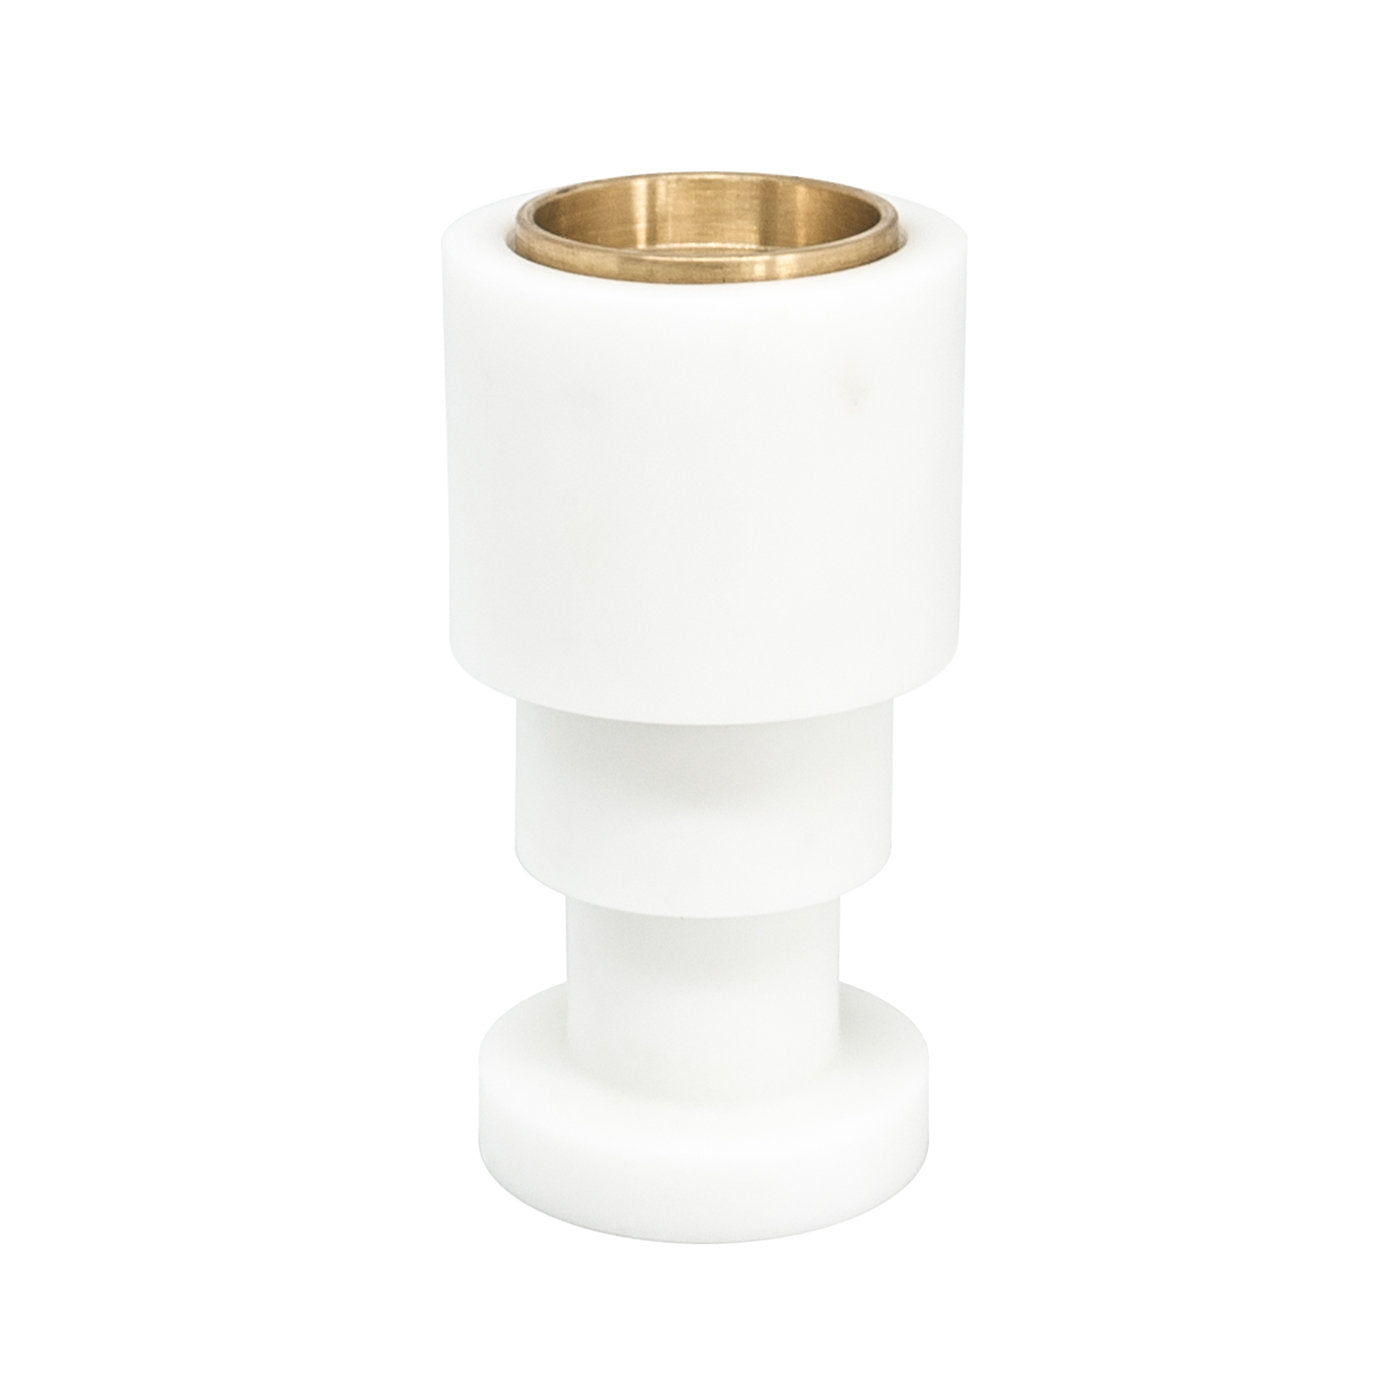 Carrara Marble and Brass Candleholder by Jacopo Simonetti - Alternative view 1